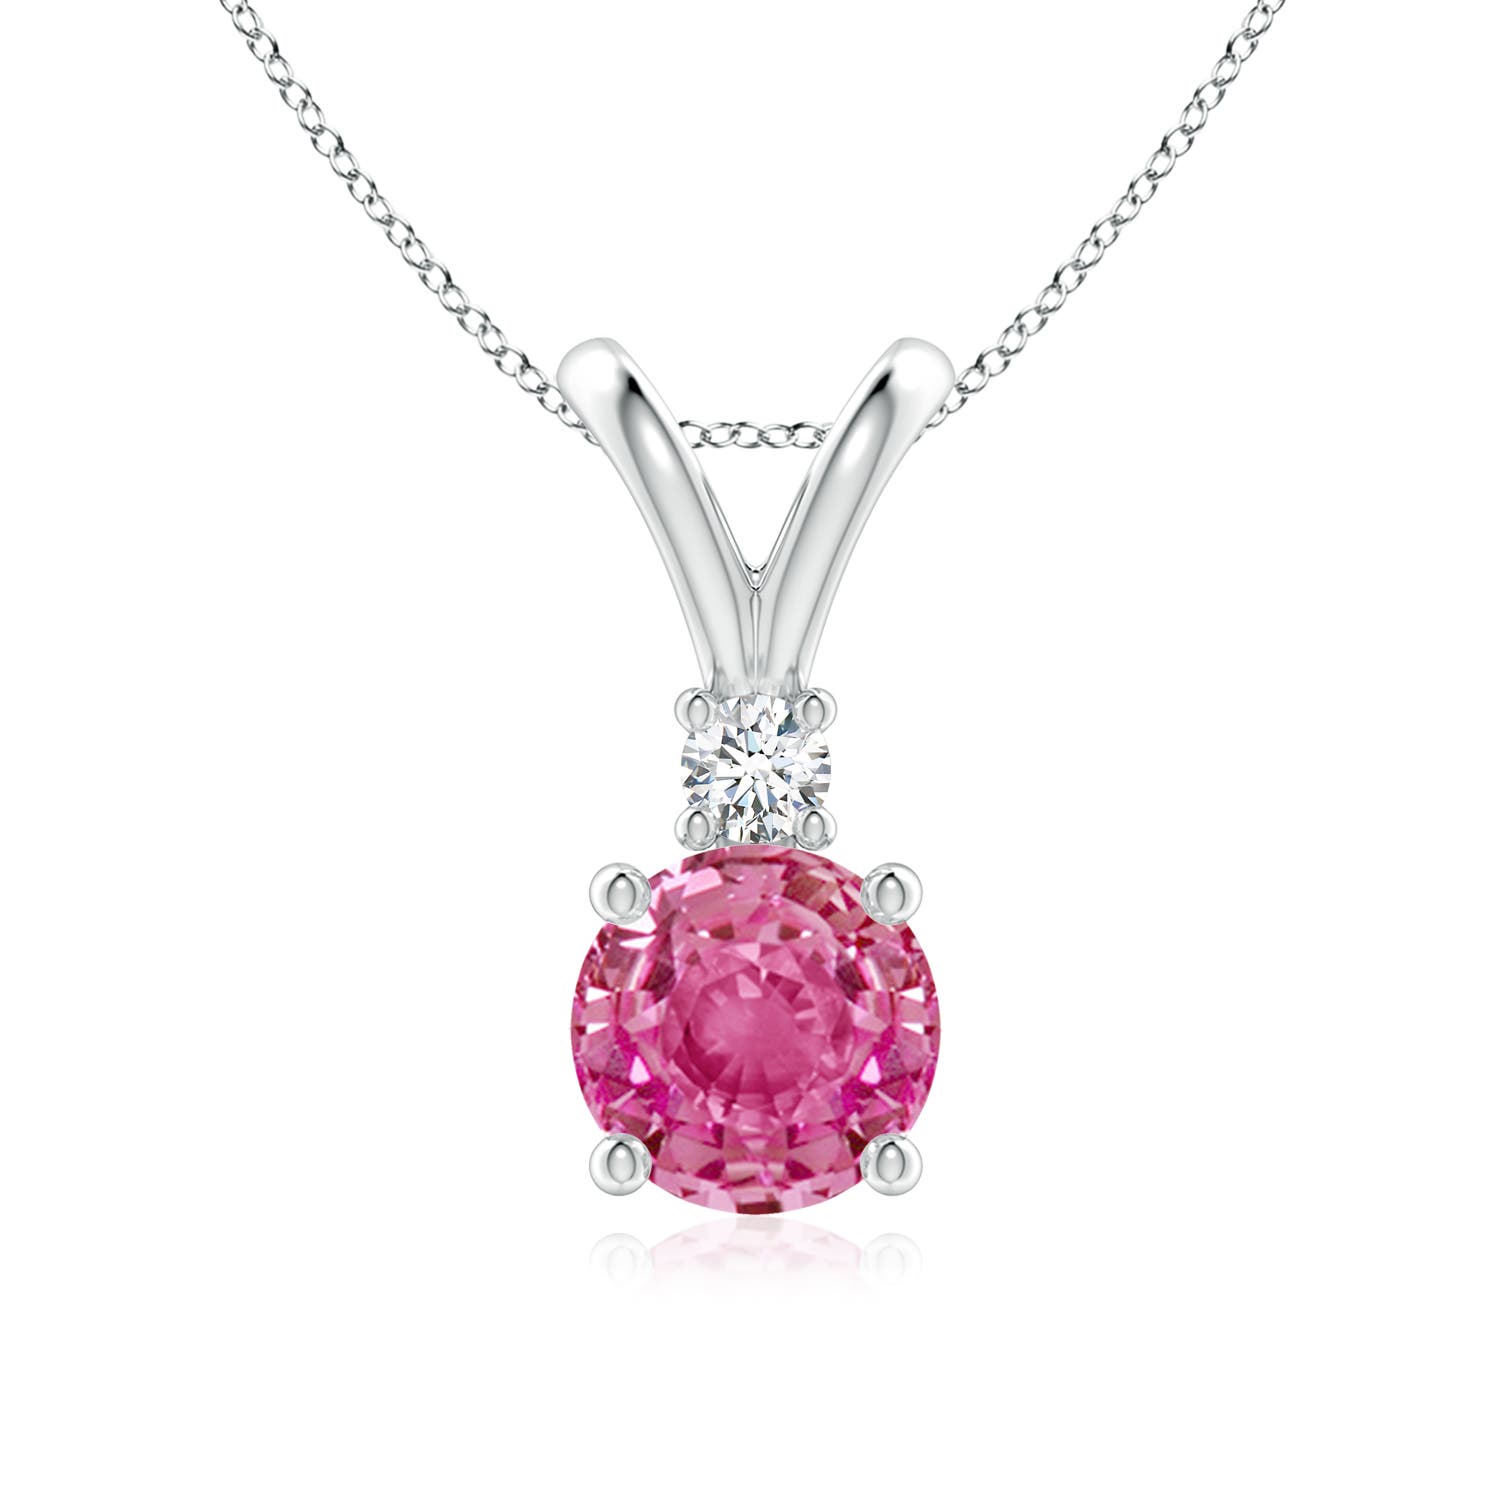 AAA - Pink Sapphire / 1.67 CT / 14 KT White Gold